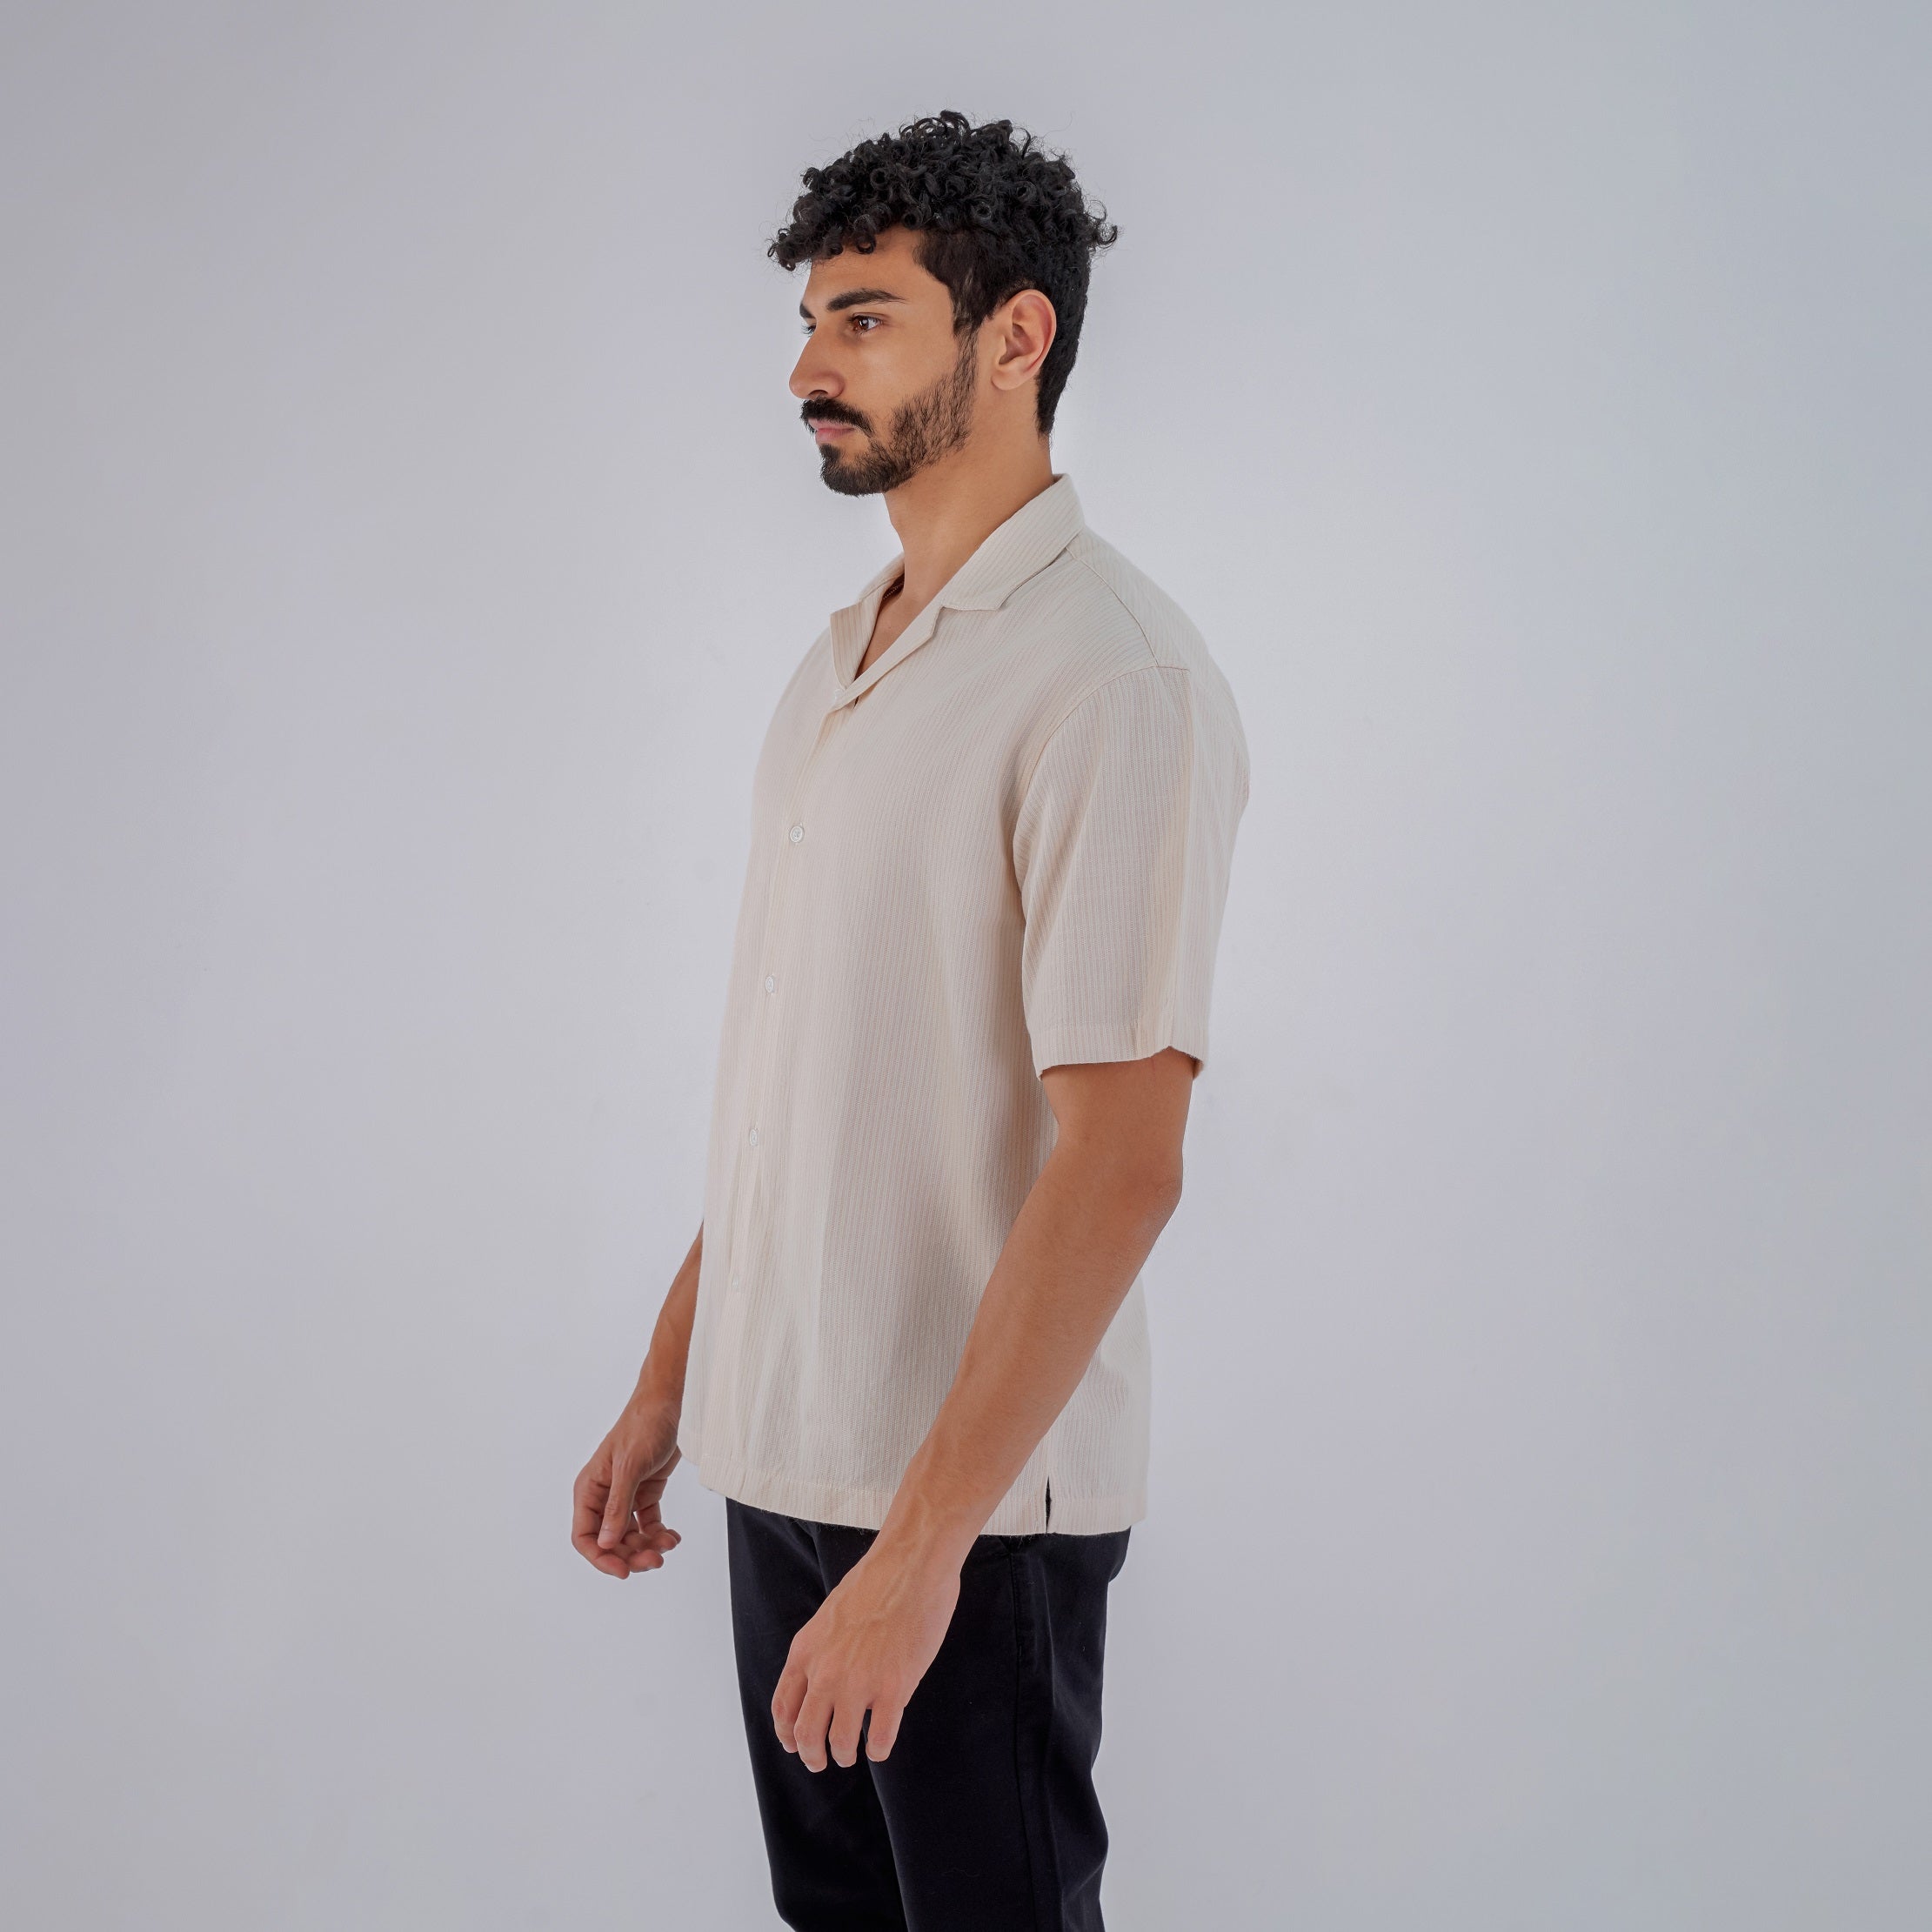 M24SN136 -Casual short sleeve cotton Shirt, Camp collar and Relaxed fit